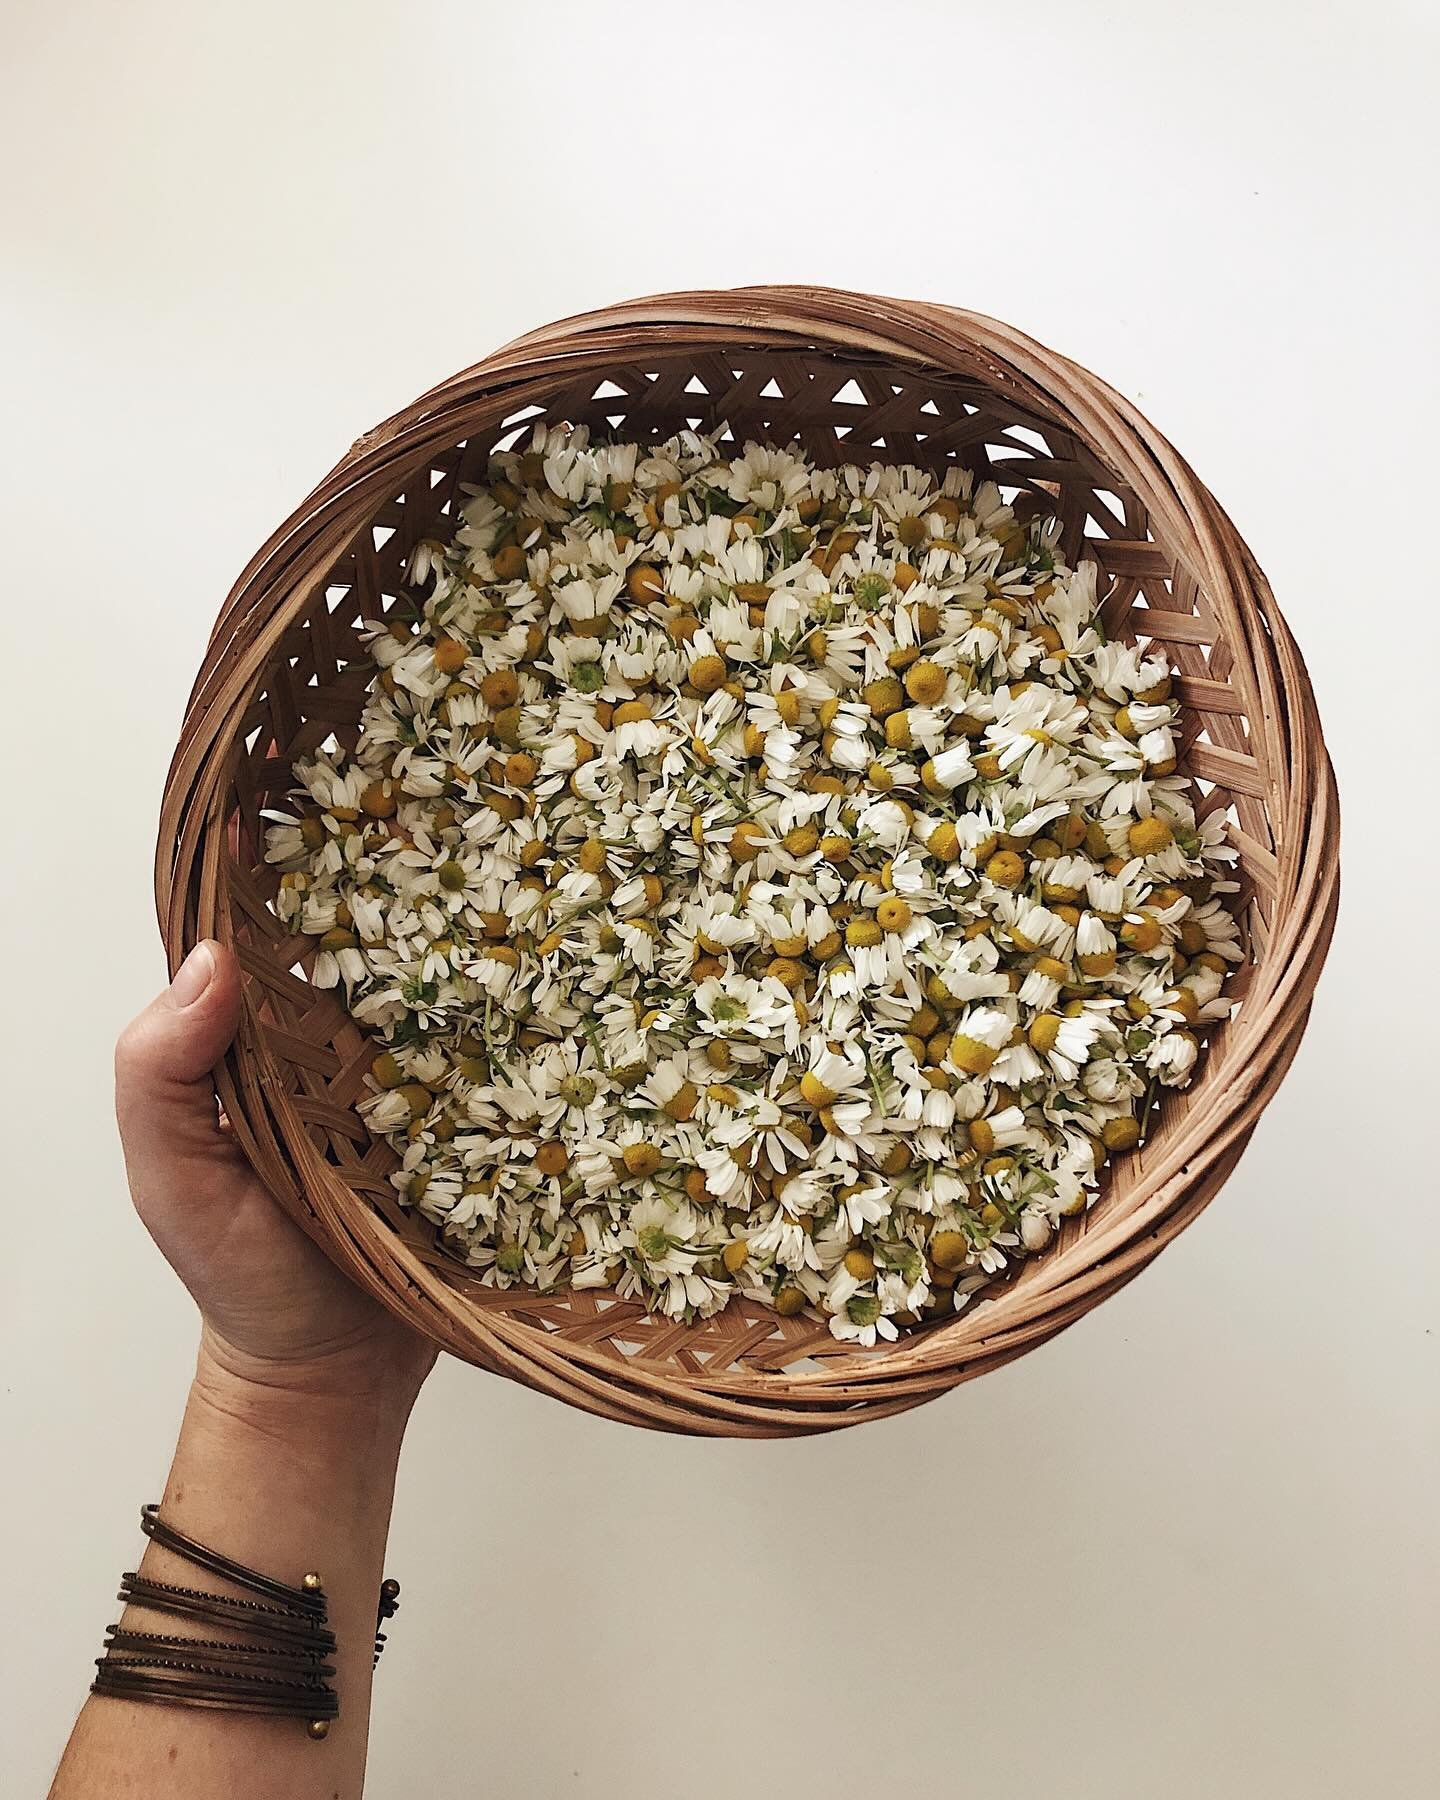 &bull;&bull;&bull;CHAMOMILE&bull;&bull;&bull;
We are plant forward here at Gatherwise. 
.
Chamomile is one of my favorite plants for the skin for its ability to calm, and soothe the skin for all skin types. Its helps limit redness, acne prone areas, 